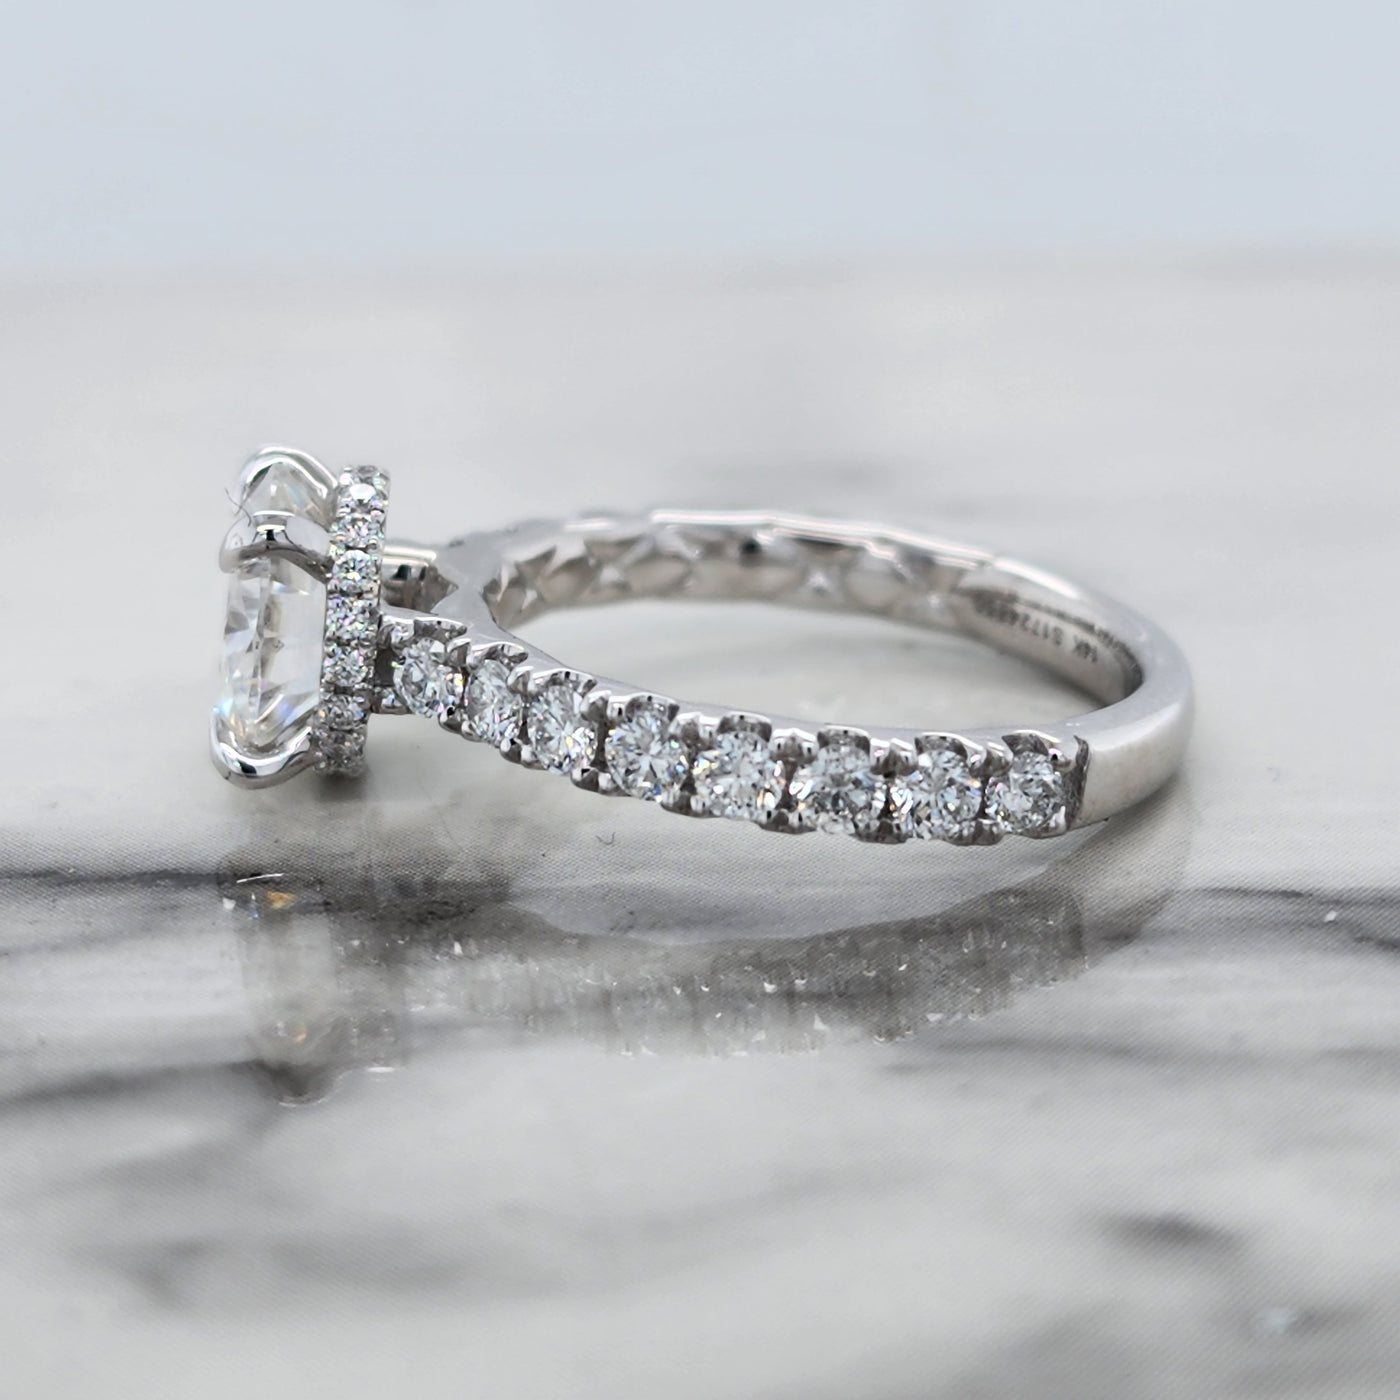 Custom White Gold Engagement Ring With Moissanite Center and Diamond Accent Stones